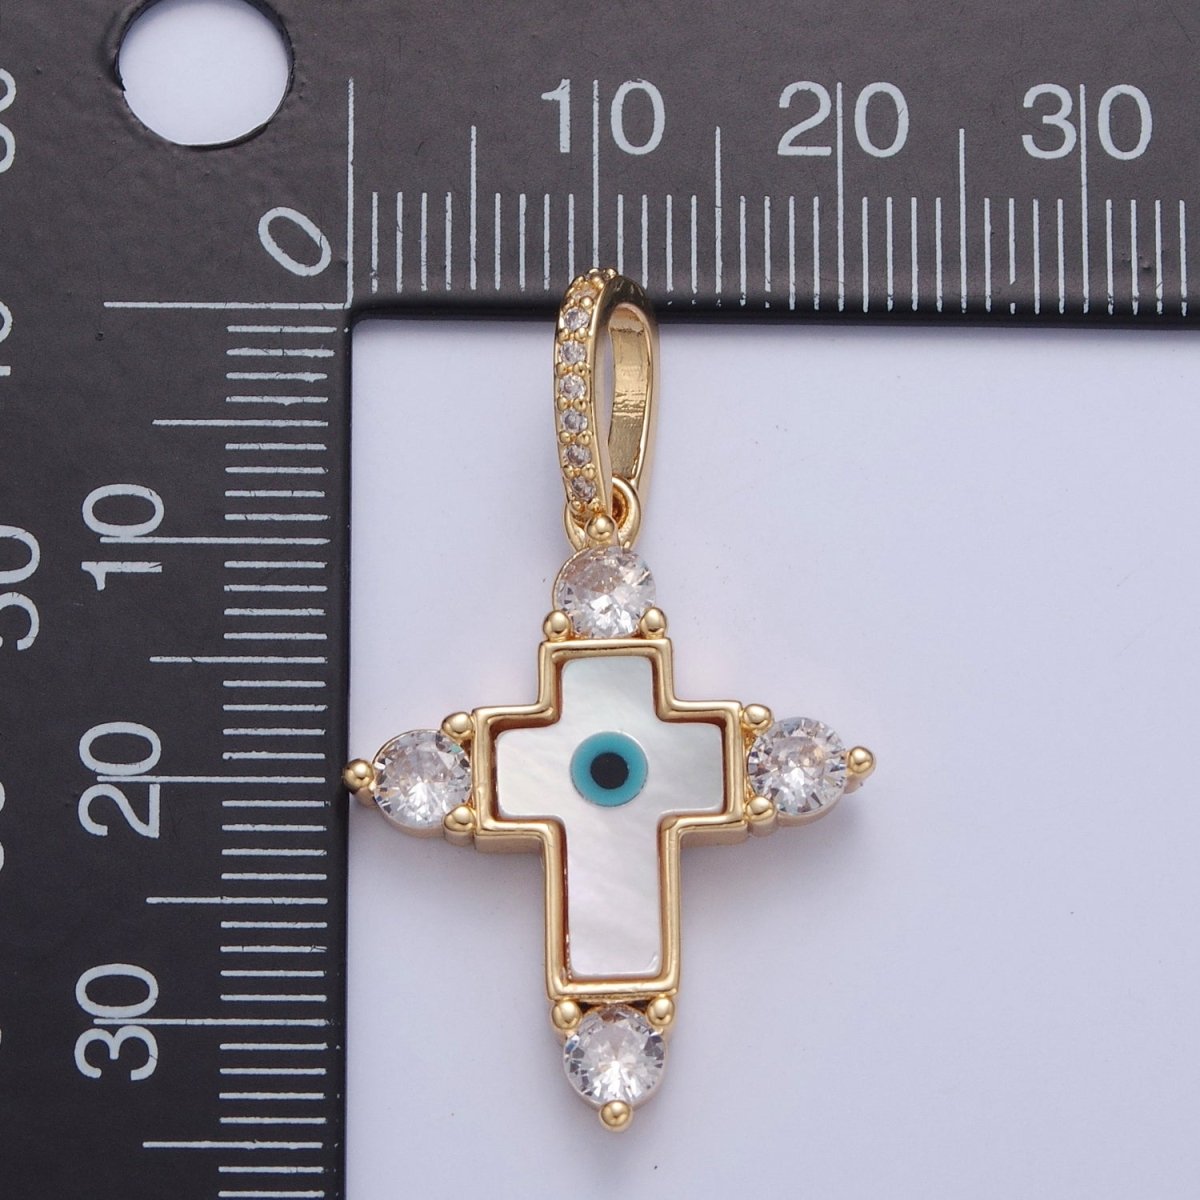 Mother of Pearl Cross Necklace Pendant Eye Cross Charm Micro Pave Cross Medallion Religious Jewelry J-638 - DLUXCA